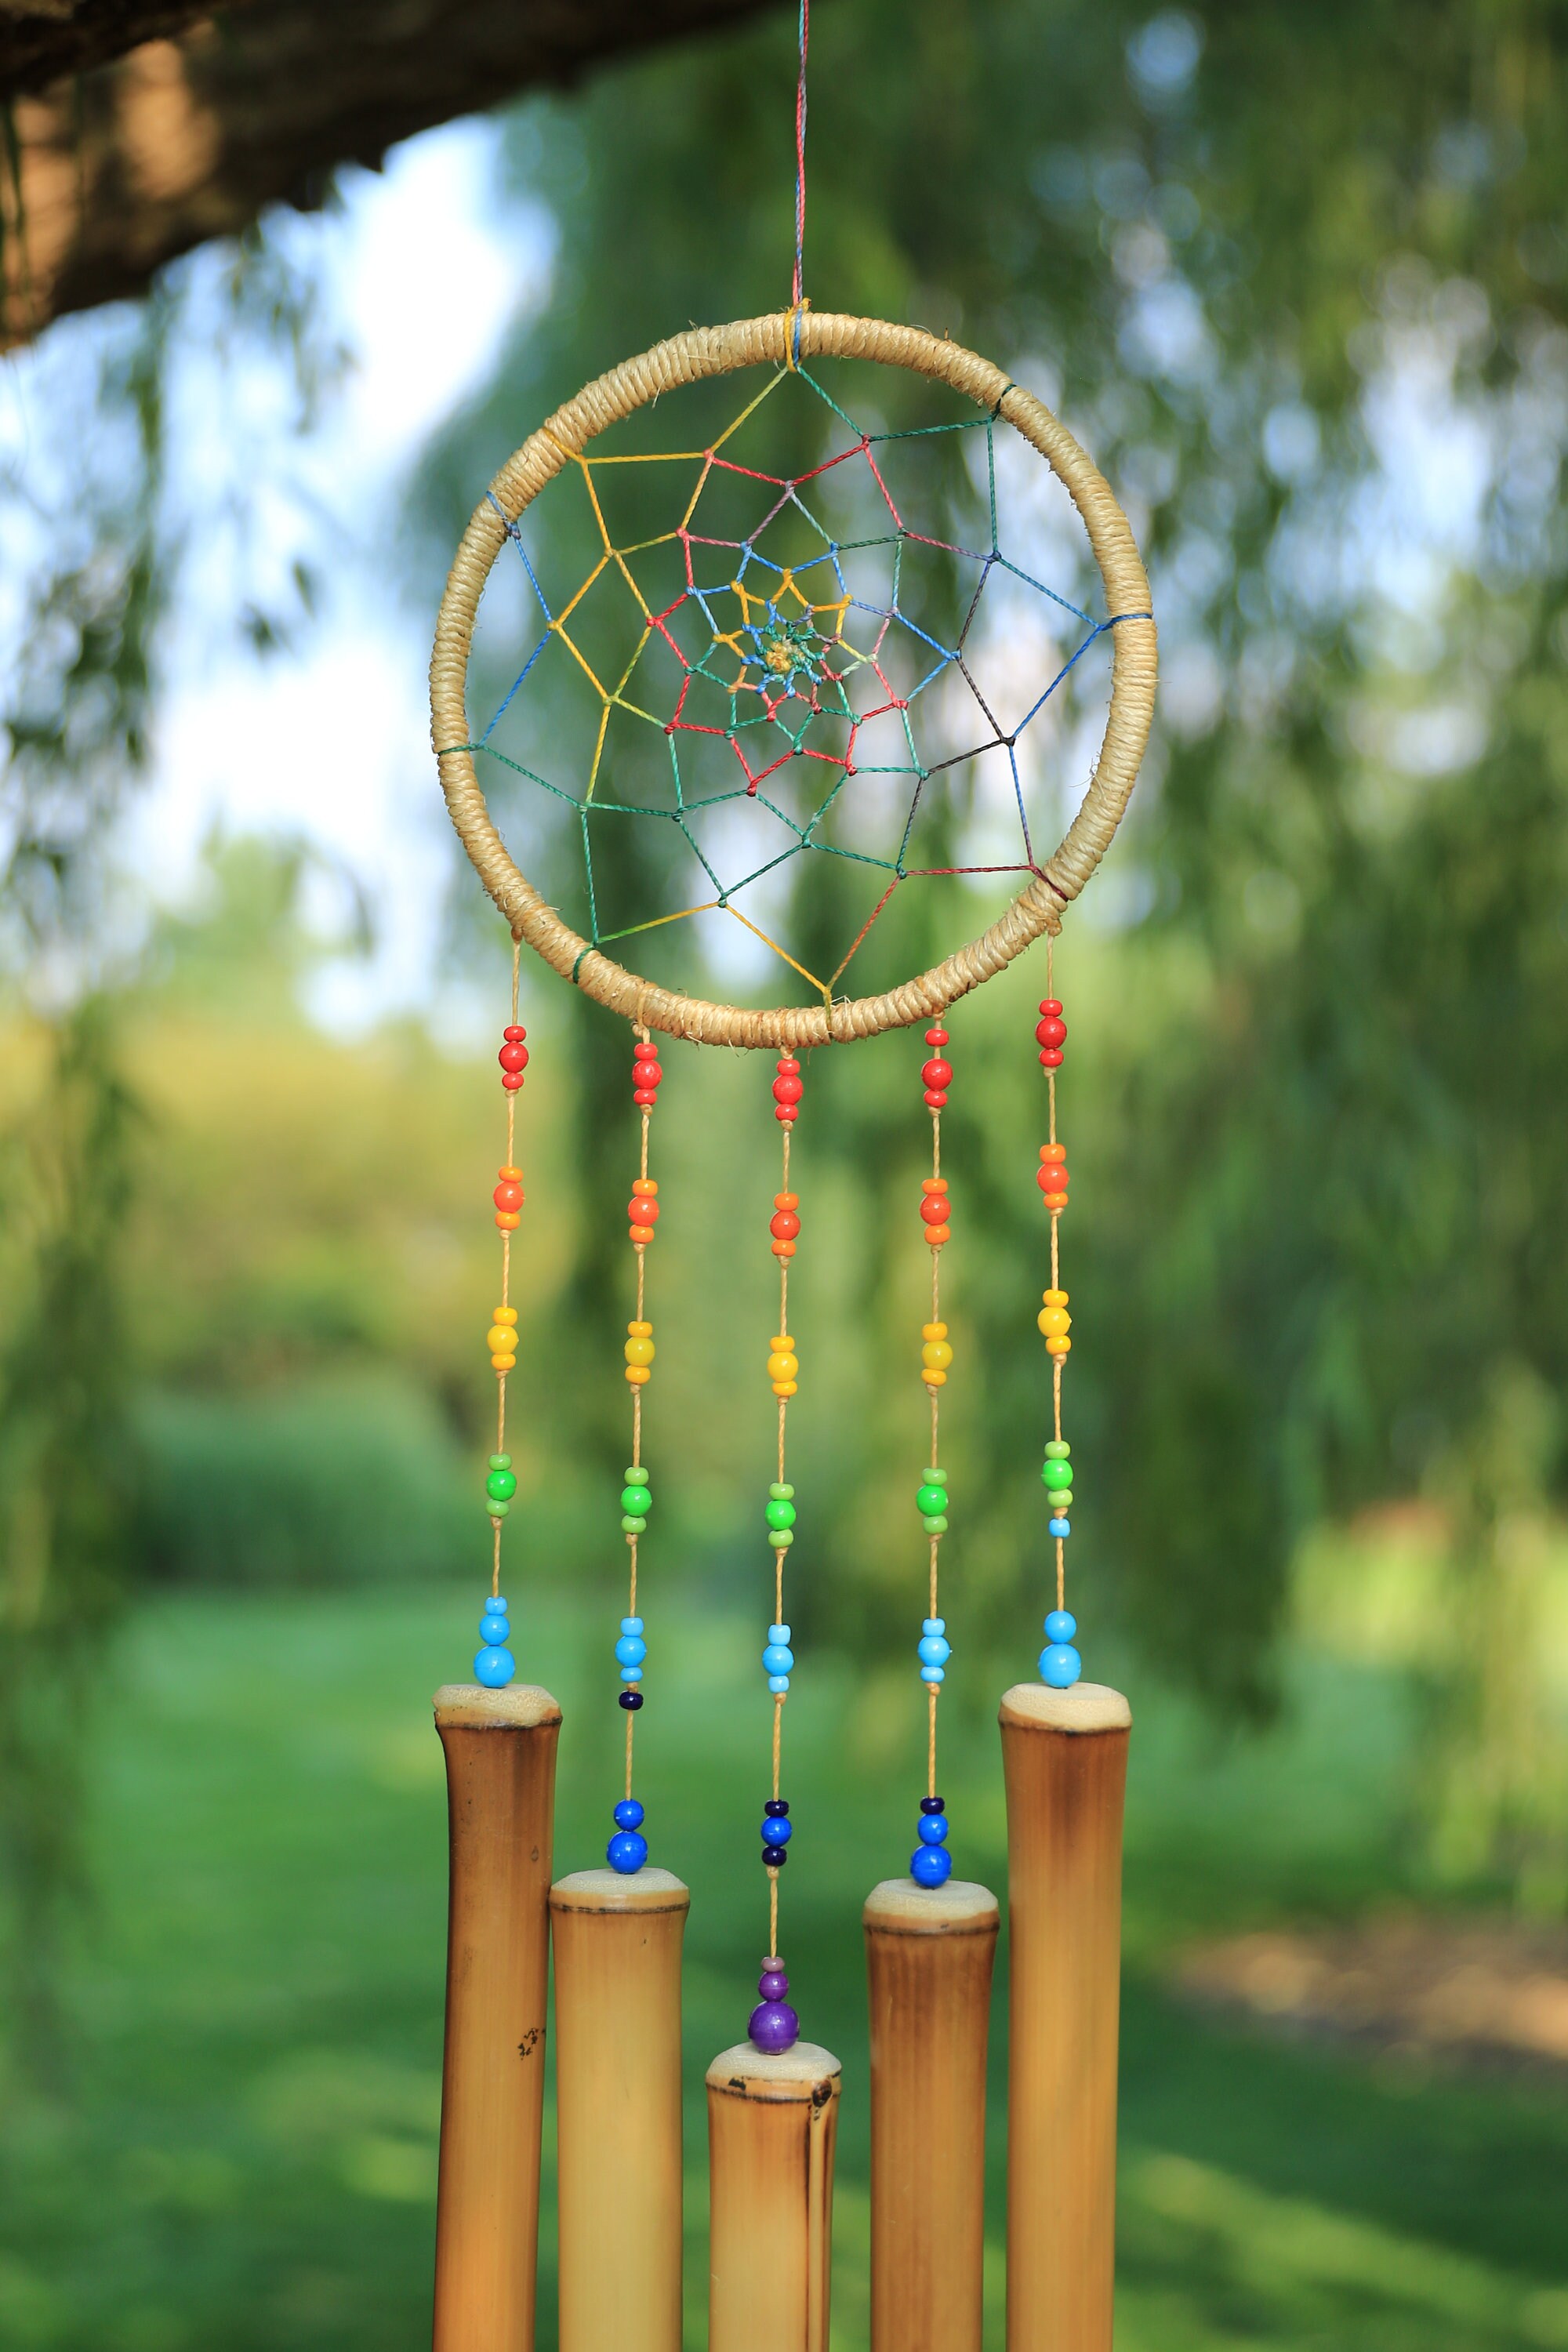 Teen Tuesday: DIY Wind Chime Kit - Grimes Public Library